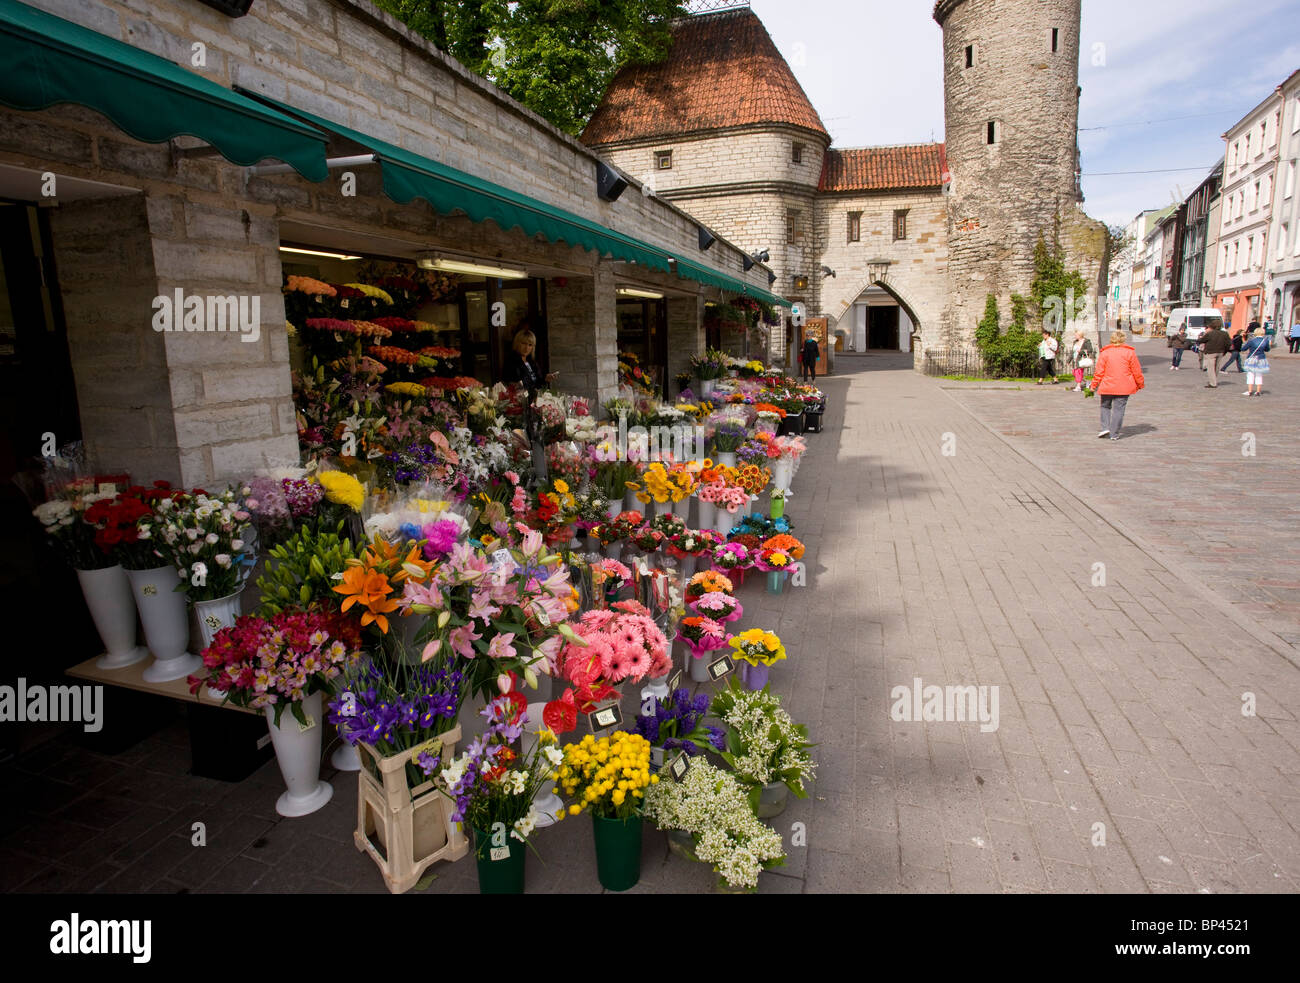 Flower market in the centre of the old part of Tallinn, World Heritage Site, Estonia Stock Photo